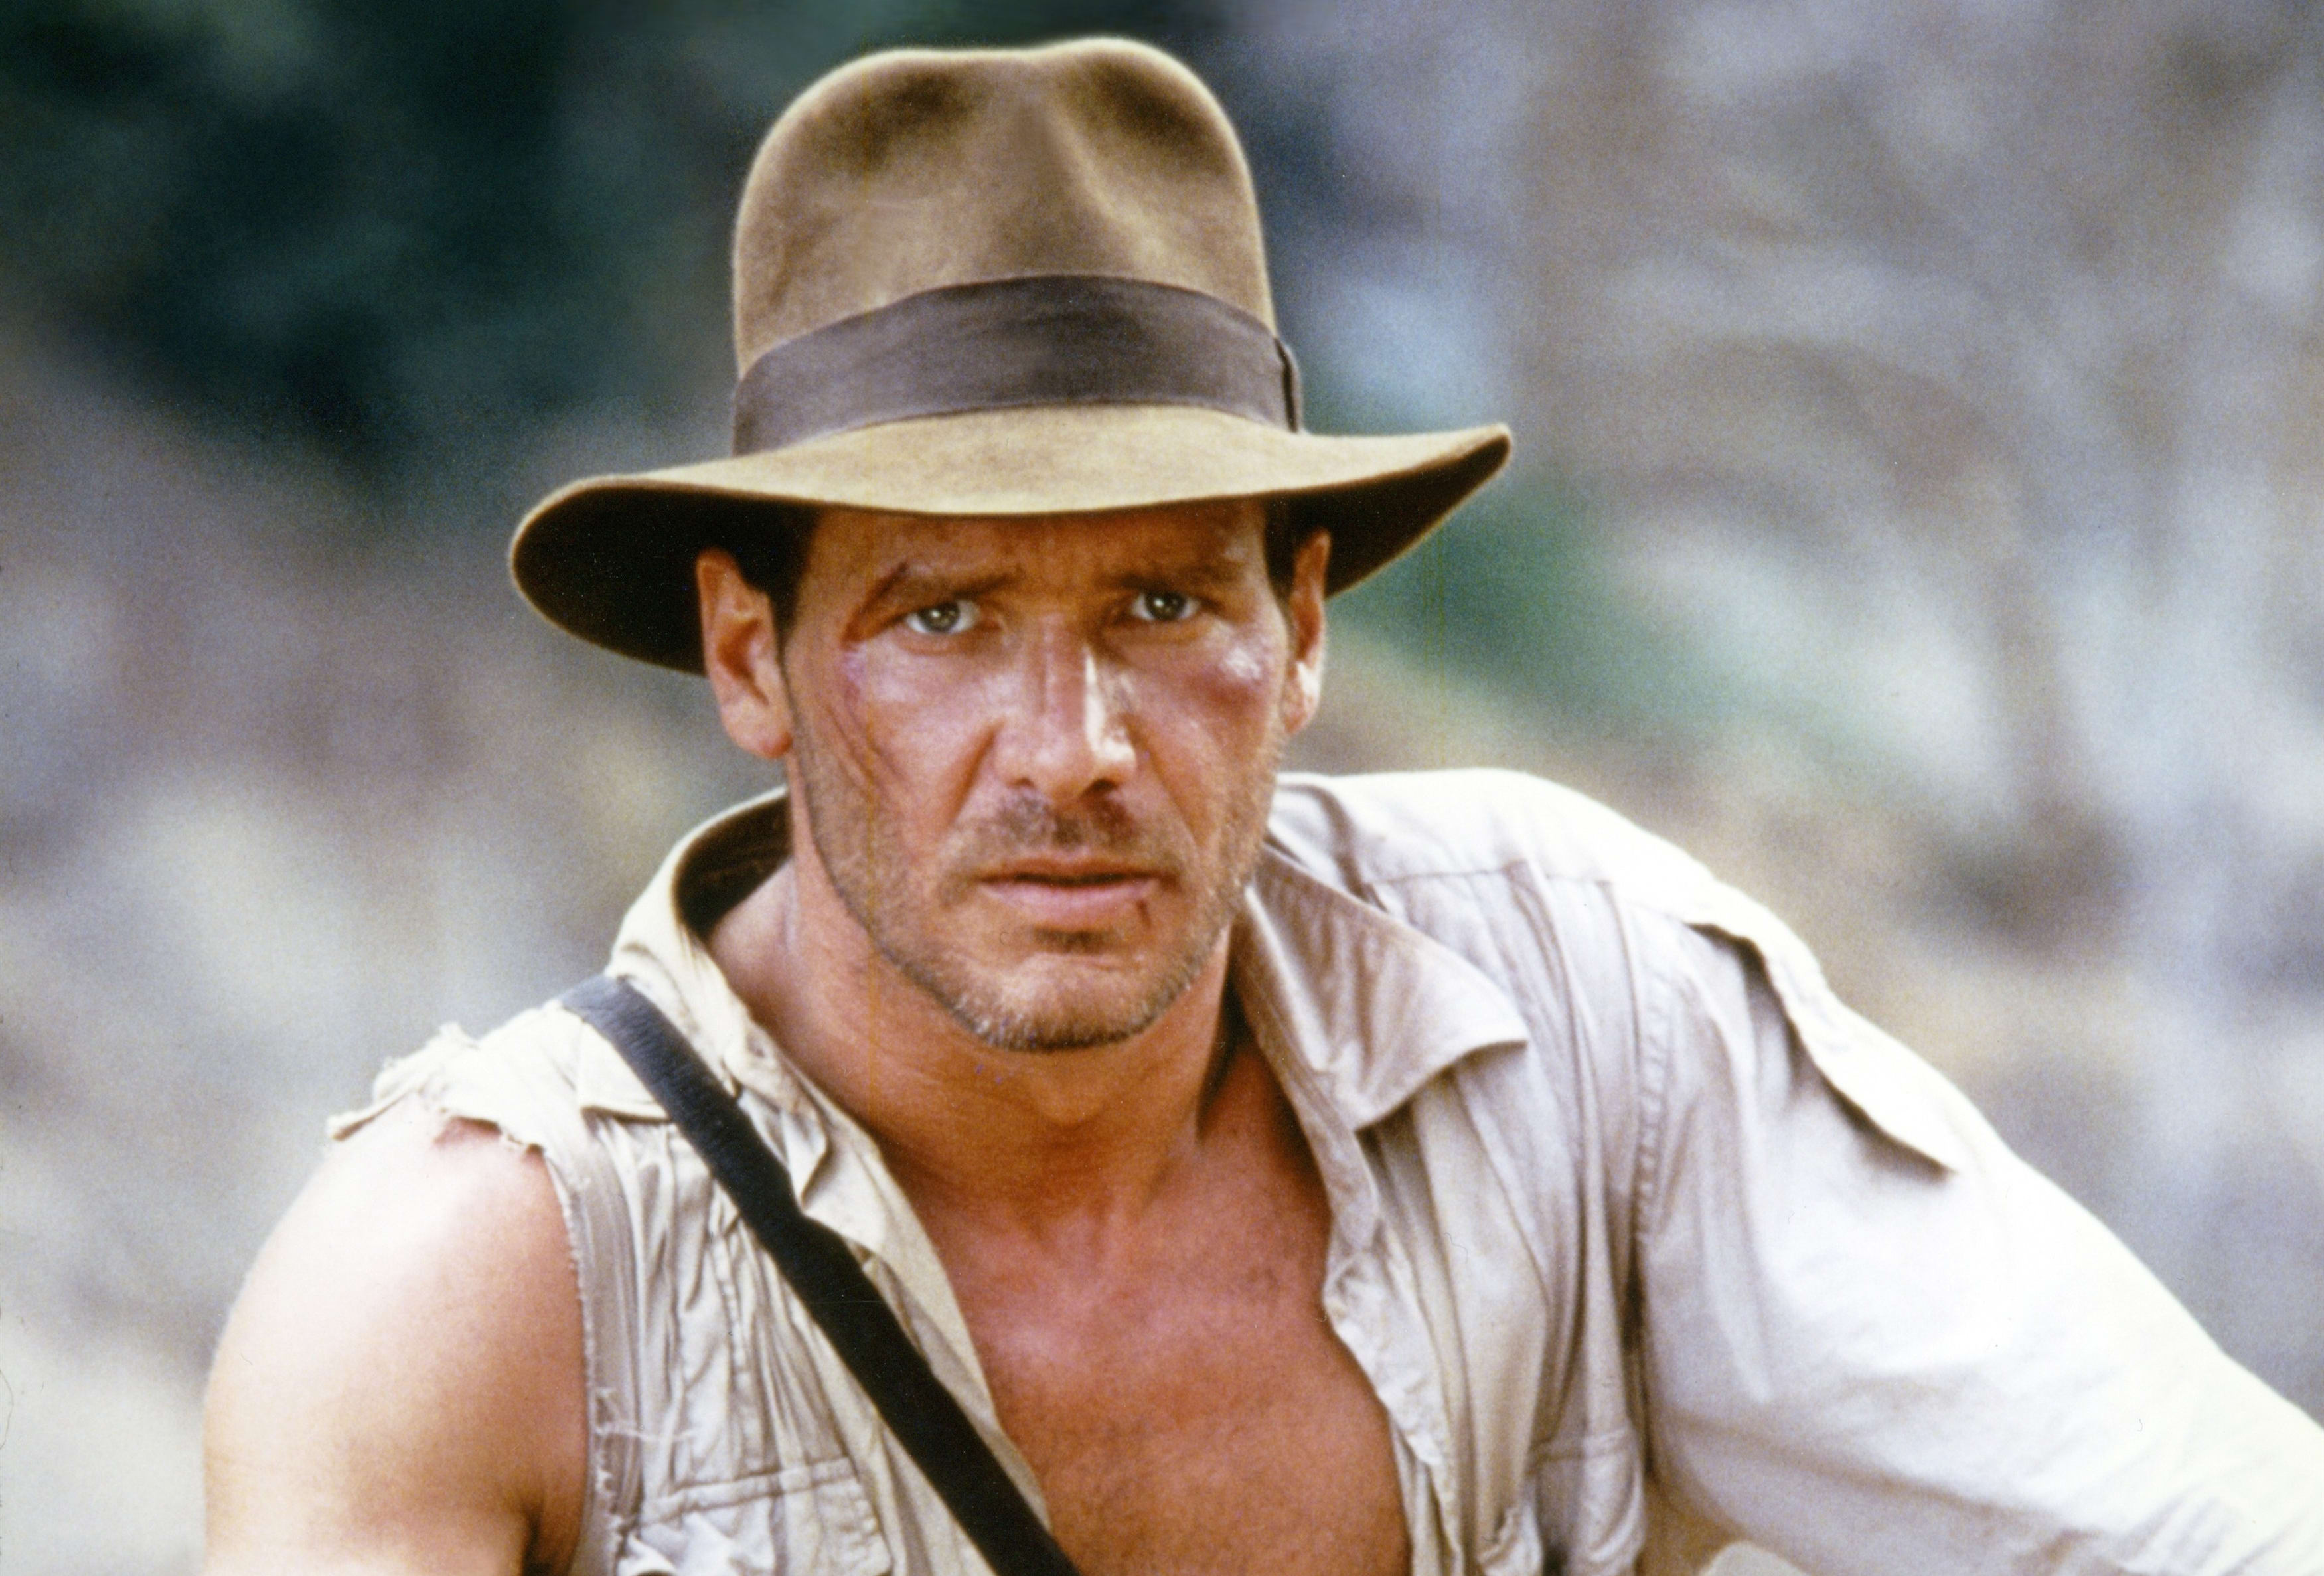 Harrison Ford (pictured) and Steven Spielberg first worked together on 1984's Indiana Jones and the Temple of Doom.